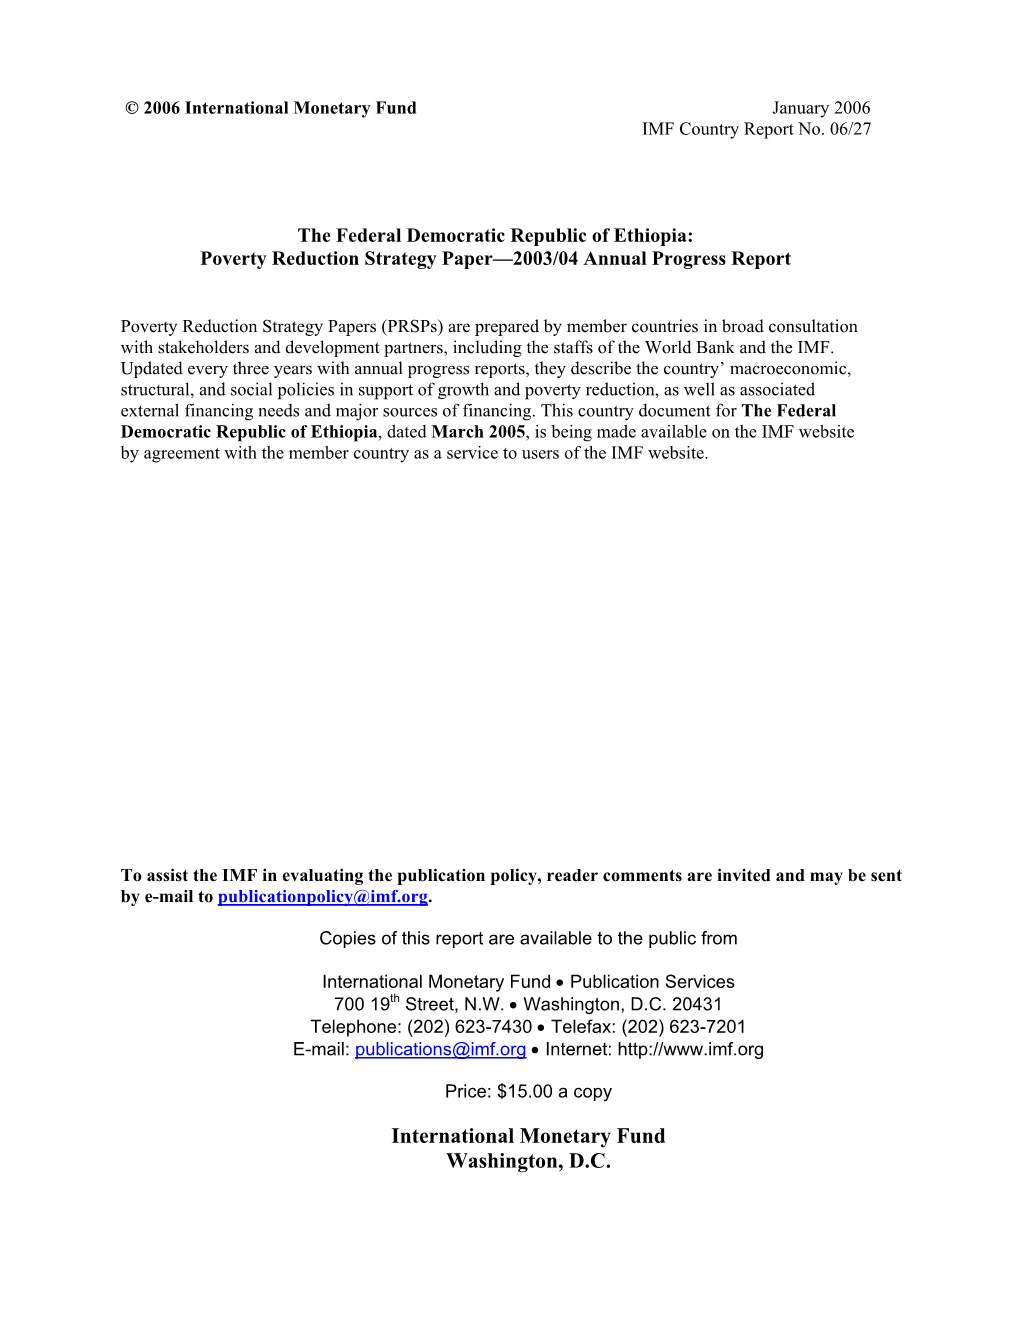 Poverty Reduction Strategy Paper--2003/04 Annual Progress